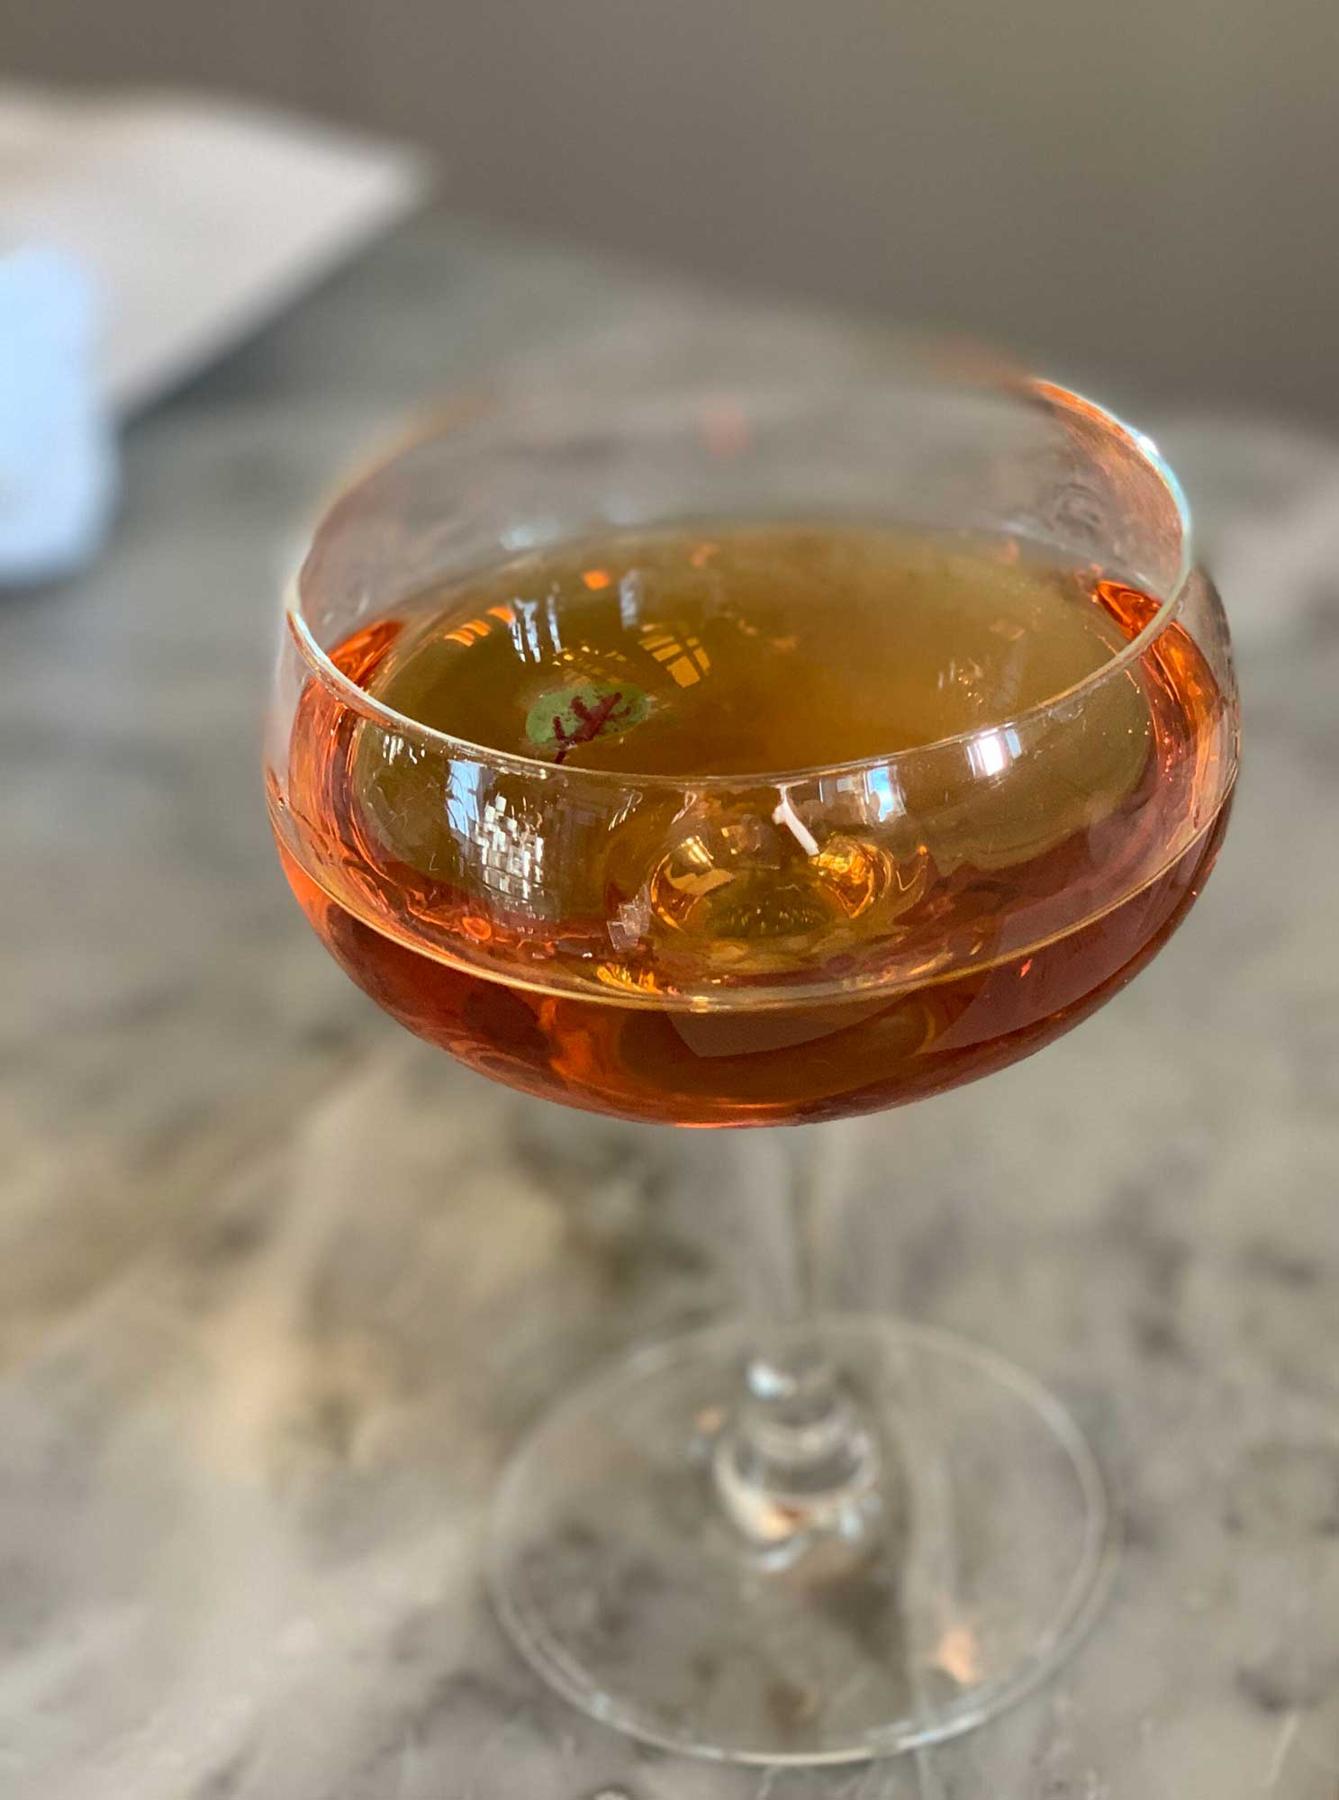 An example of the Into the Woods, the mixed drink (drink), by Lindsay Matteson, The Walrus and the Carpenter, Seattle, featuring Hayman’s London Dry Gin, Cocchi Americano Bianco, Zirbenz Stone Pine Liqueur of the Alps, Amaro Alta Verde, and Scrappy’s Aromatic Bitters